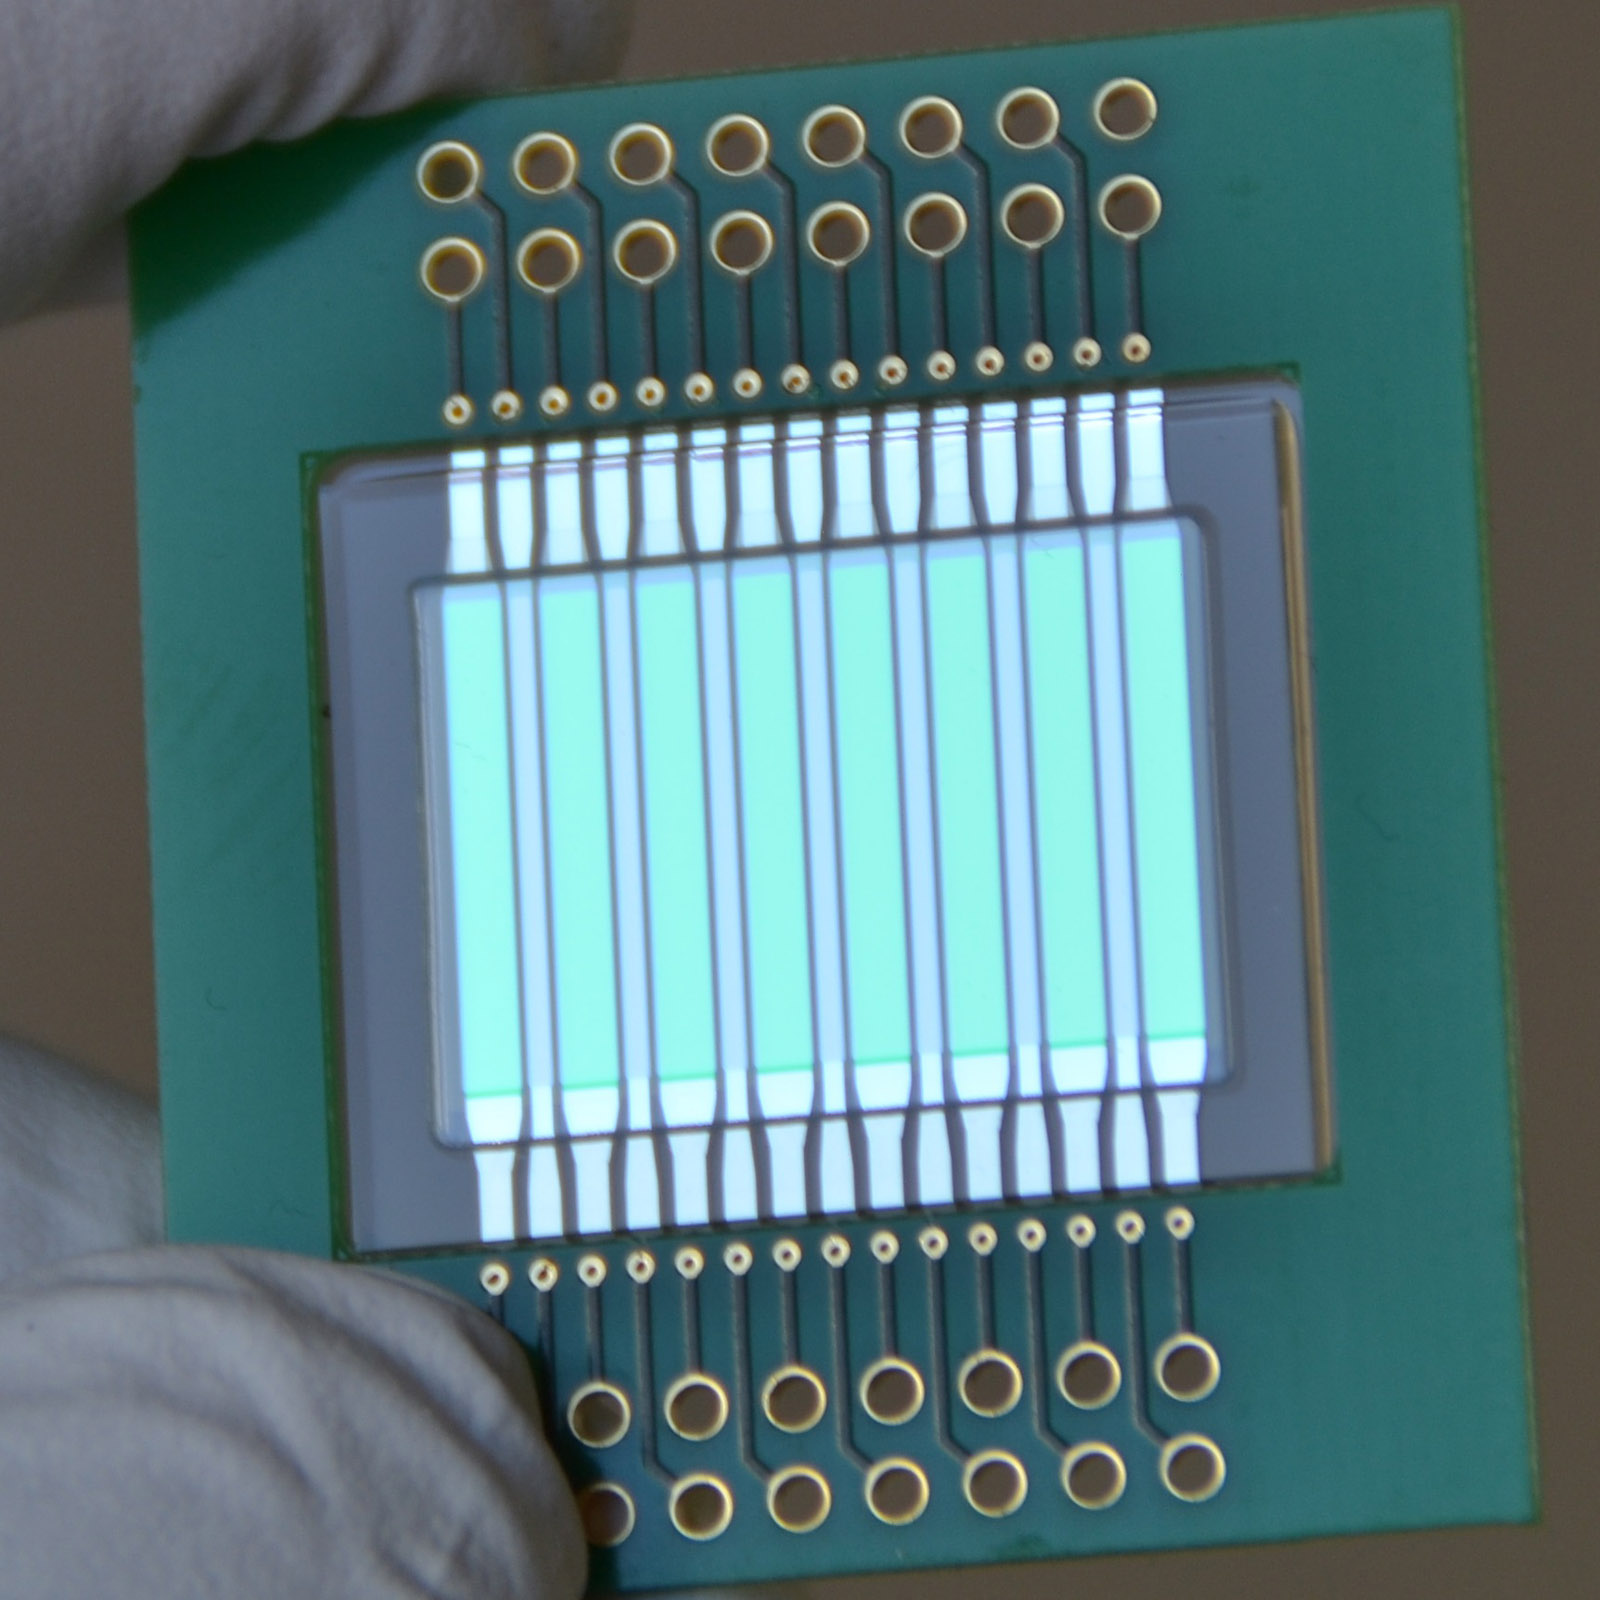 Chip with integrated light source and light detector for analyzing contaminants in milk.